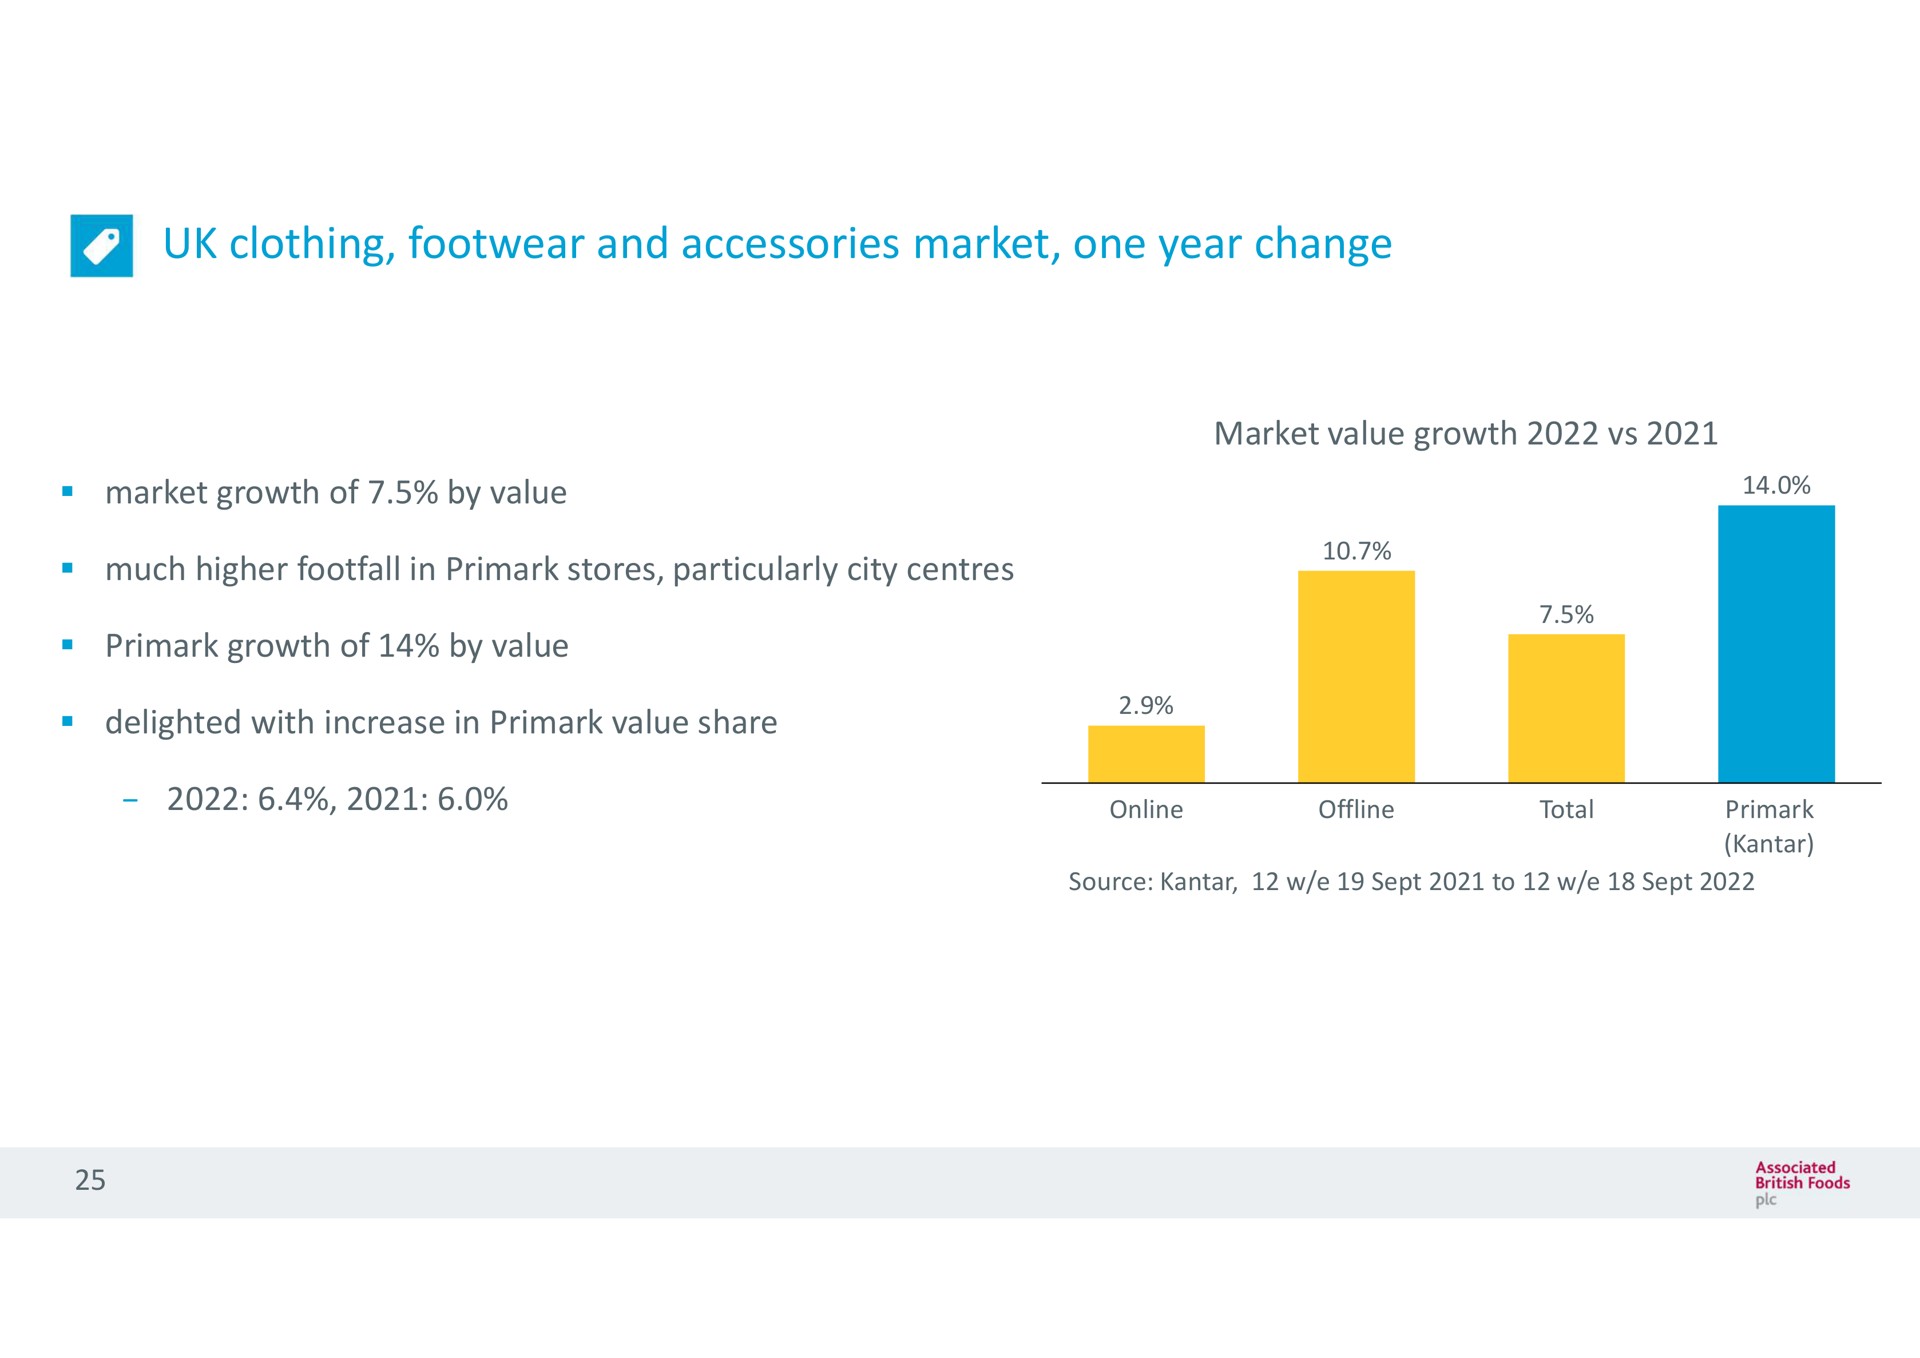 clothing footwear and accessories market one year change | Associated British Foods